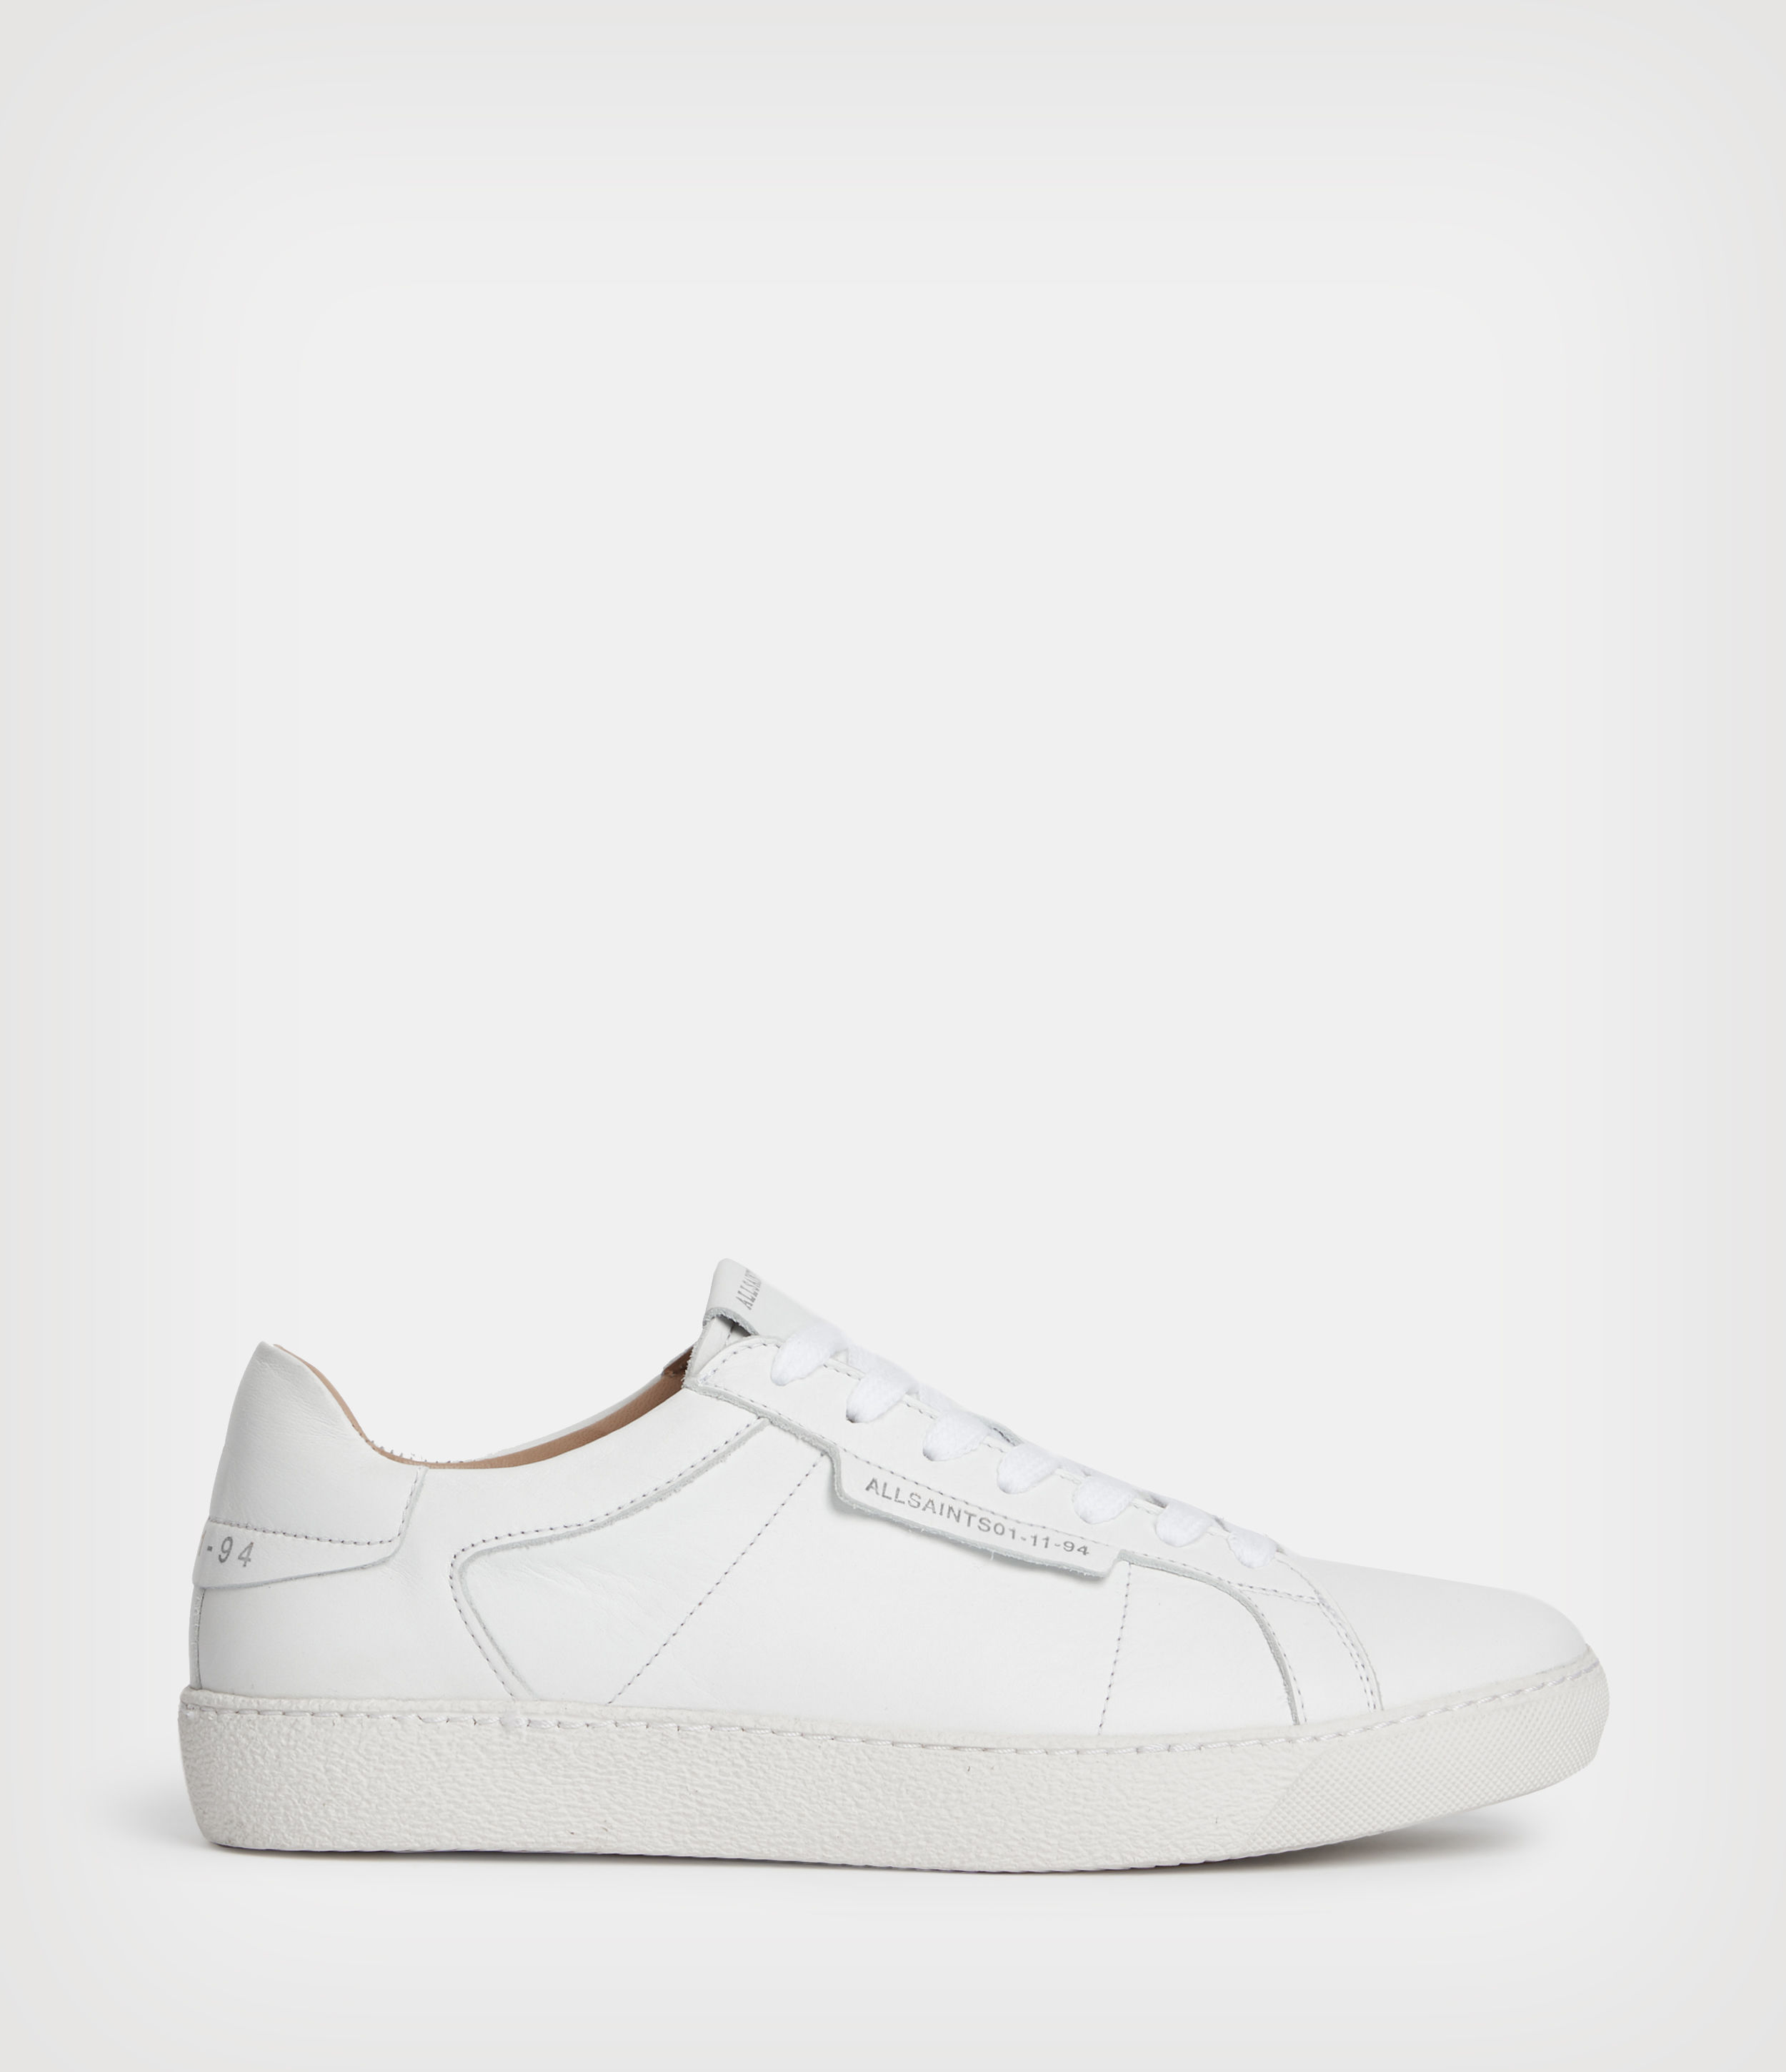 AllSaints Men's Sheer Low Top Leather Trainers, White, Size: UK 9/US 10/EU 43